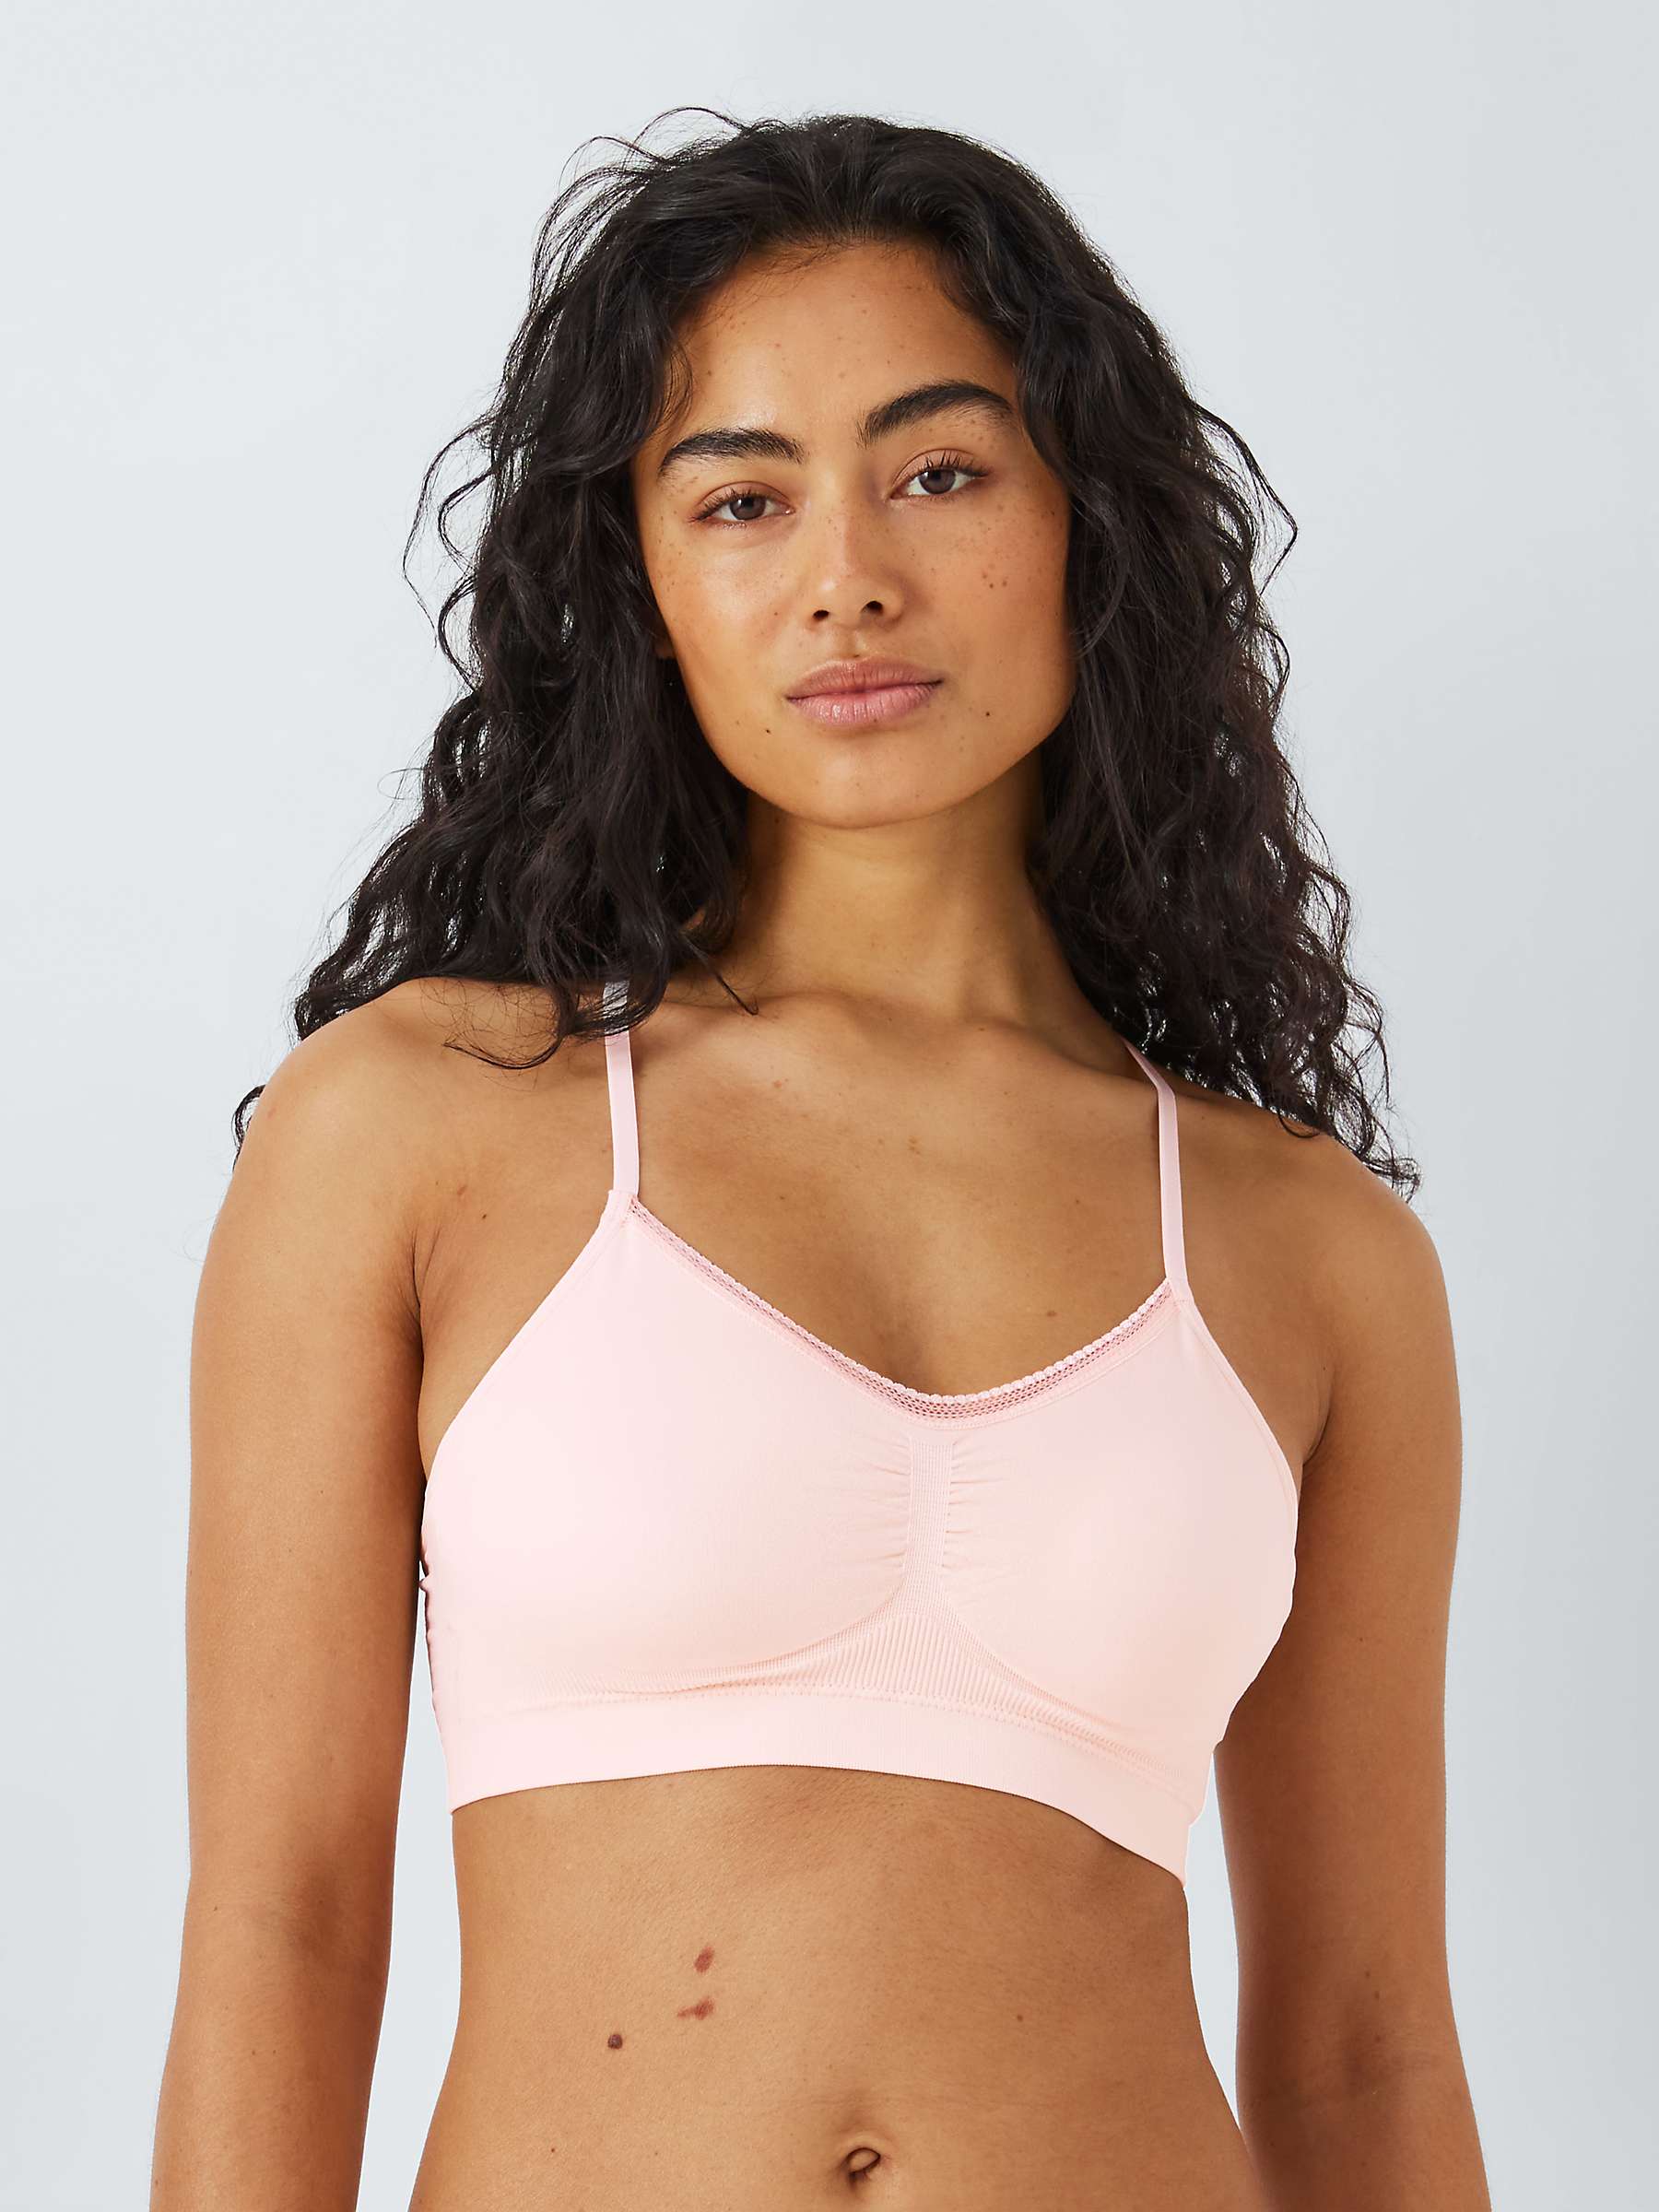 Buy John Lewis ANYDAY Gentle Support April Seamfree Cropped Bra Online at johnlewis.com